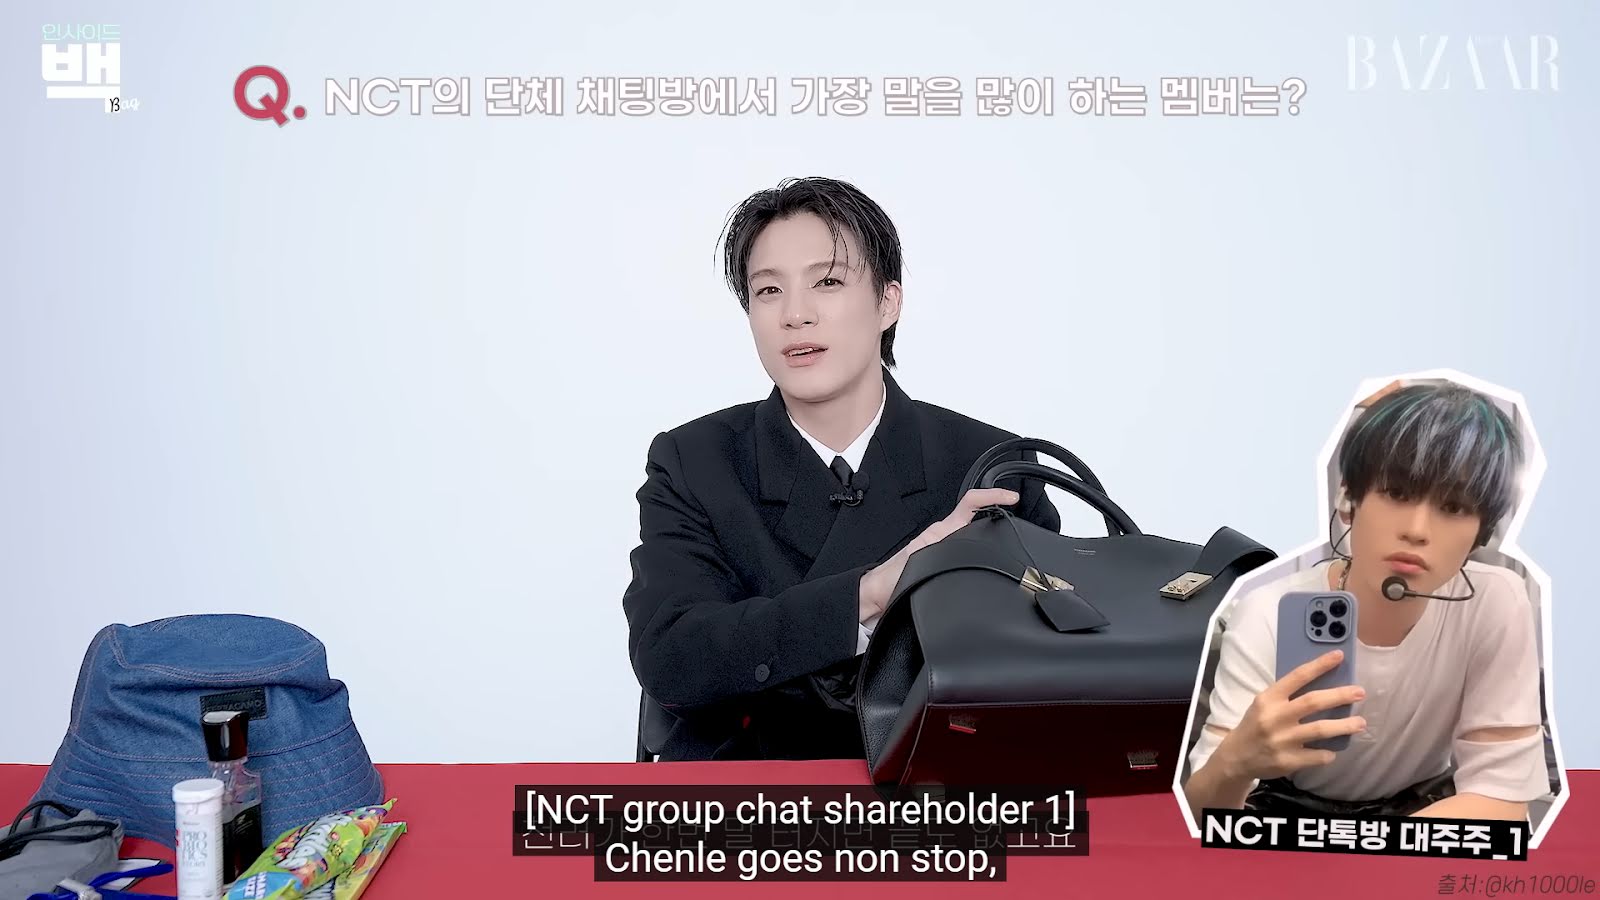 2 nct dream jeno harpers bazaar group chat chenle jisung fight